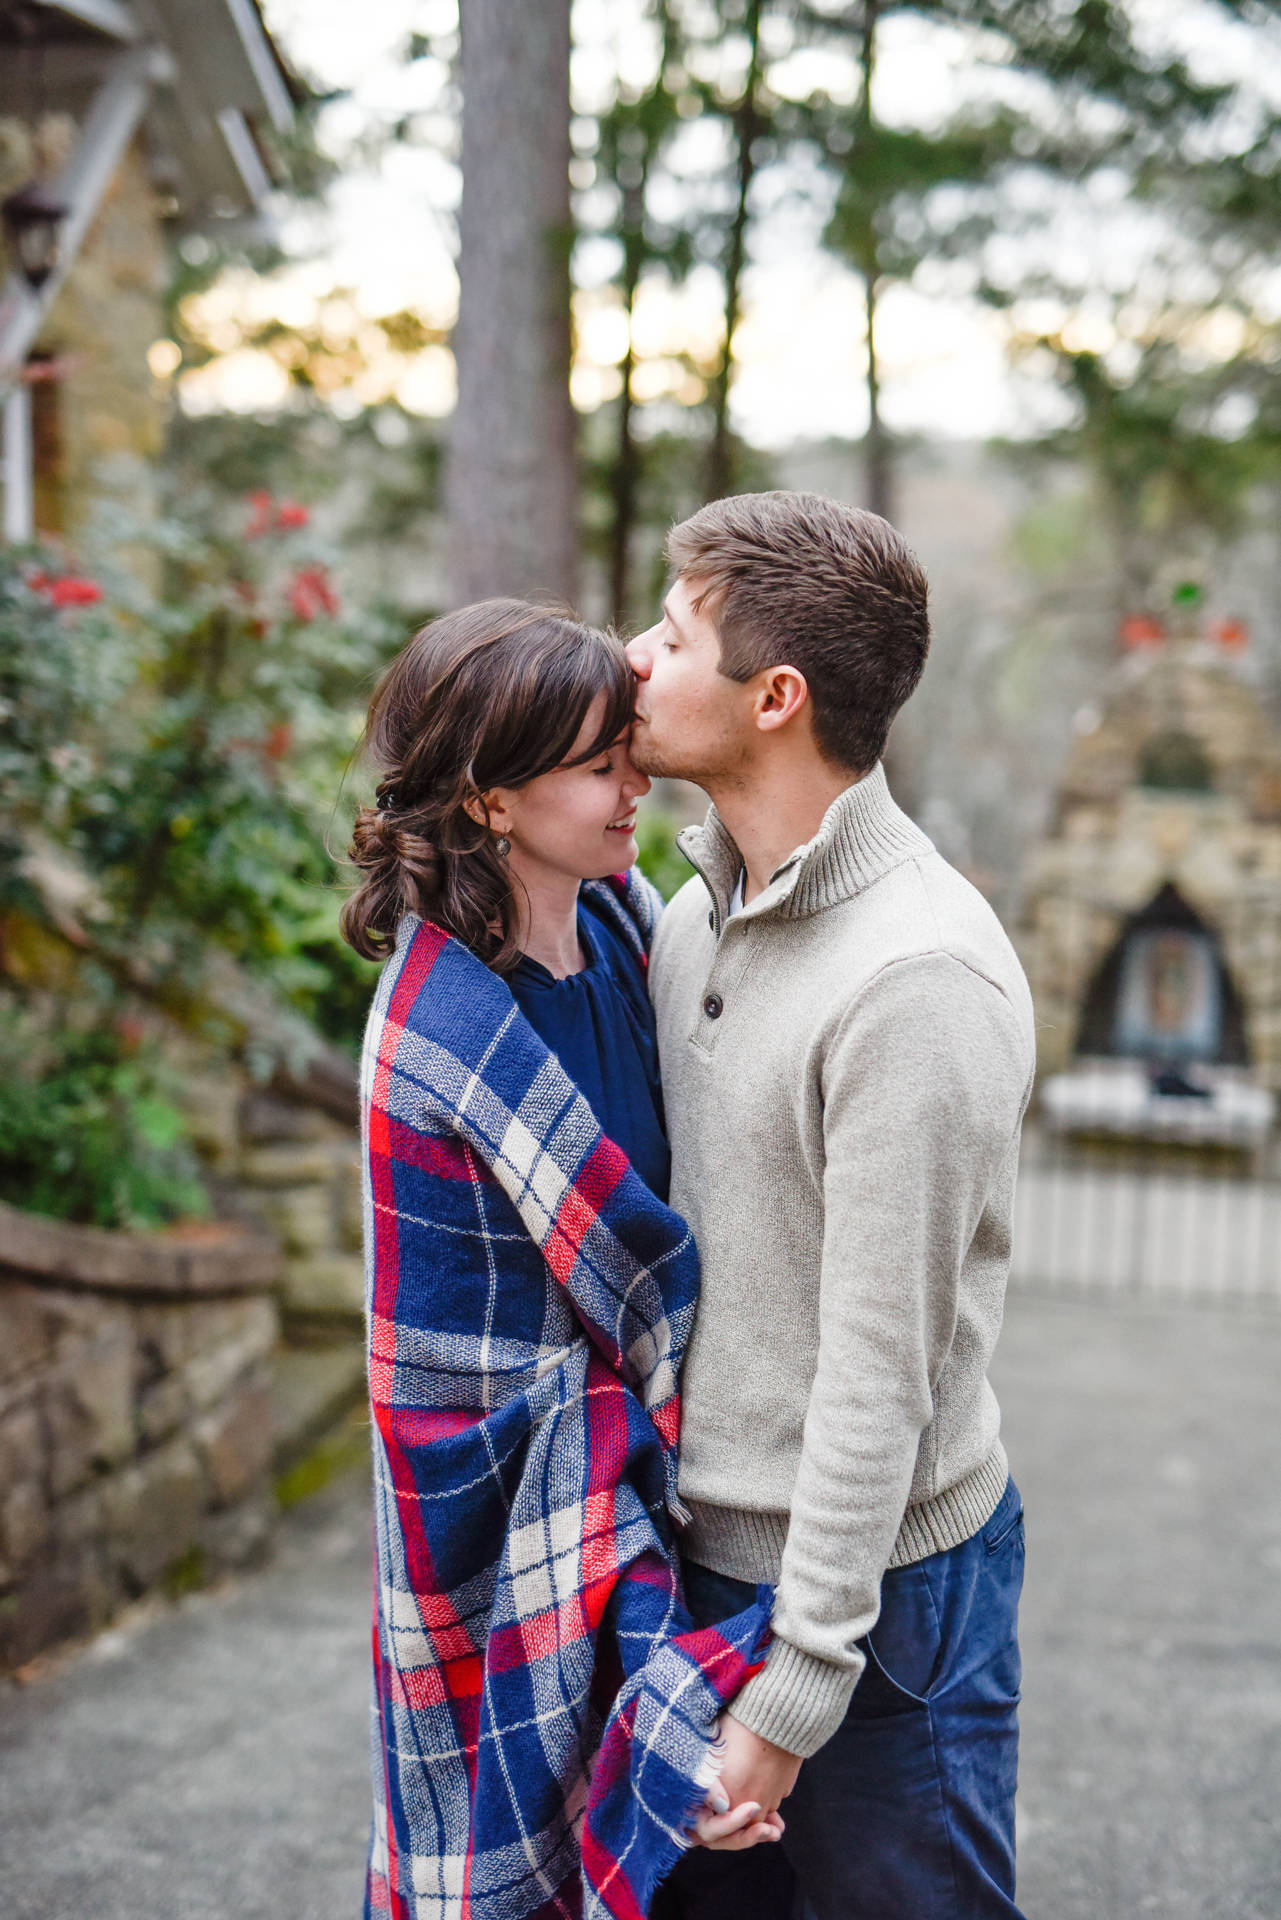 Couple Forehead Kiss In Garden Background